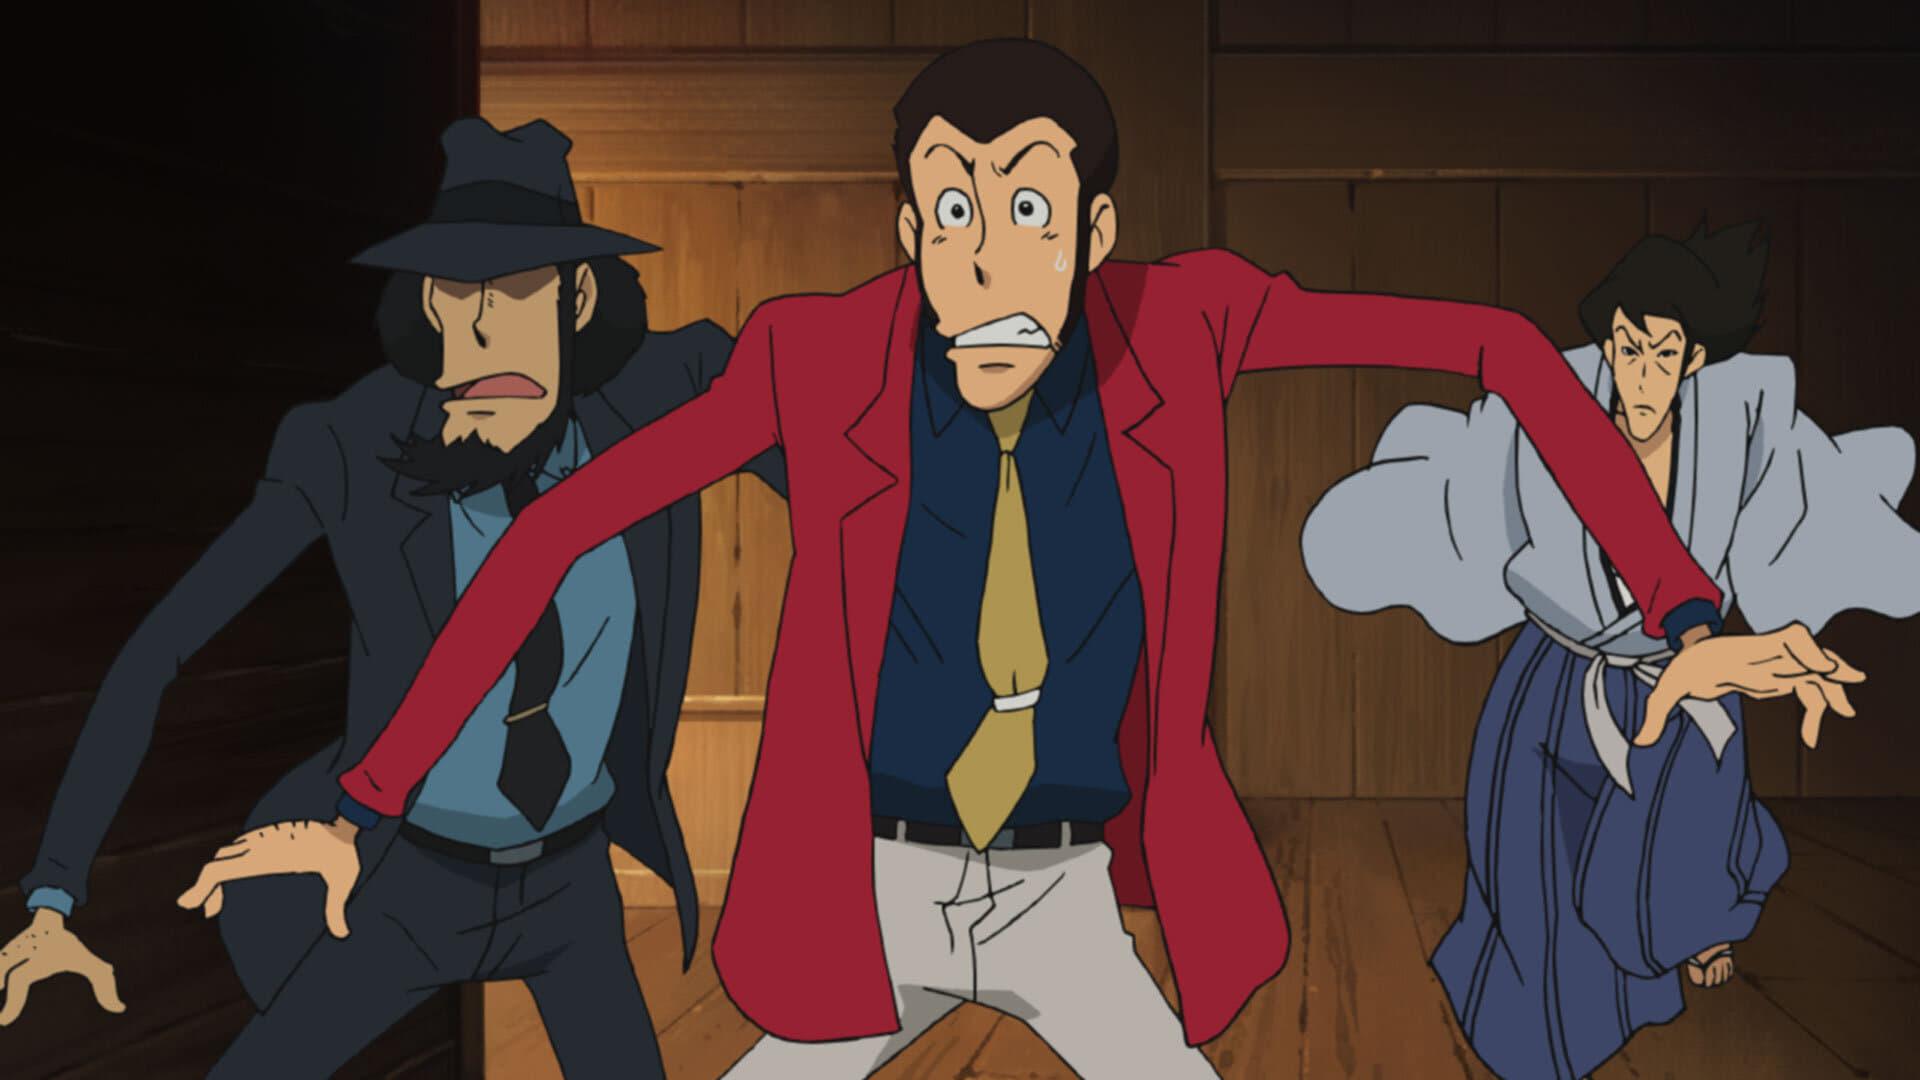 Lupin the 3rd: The Elusiveness of the Fog backdrop